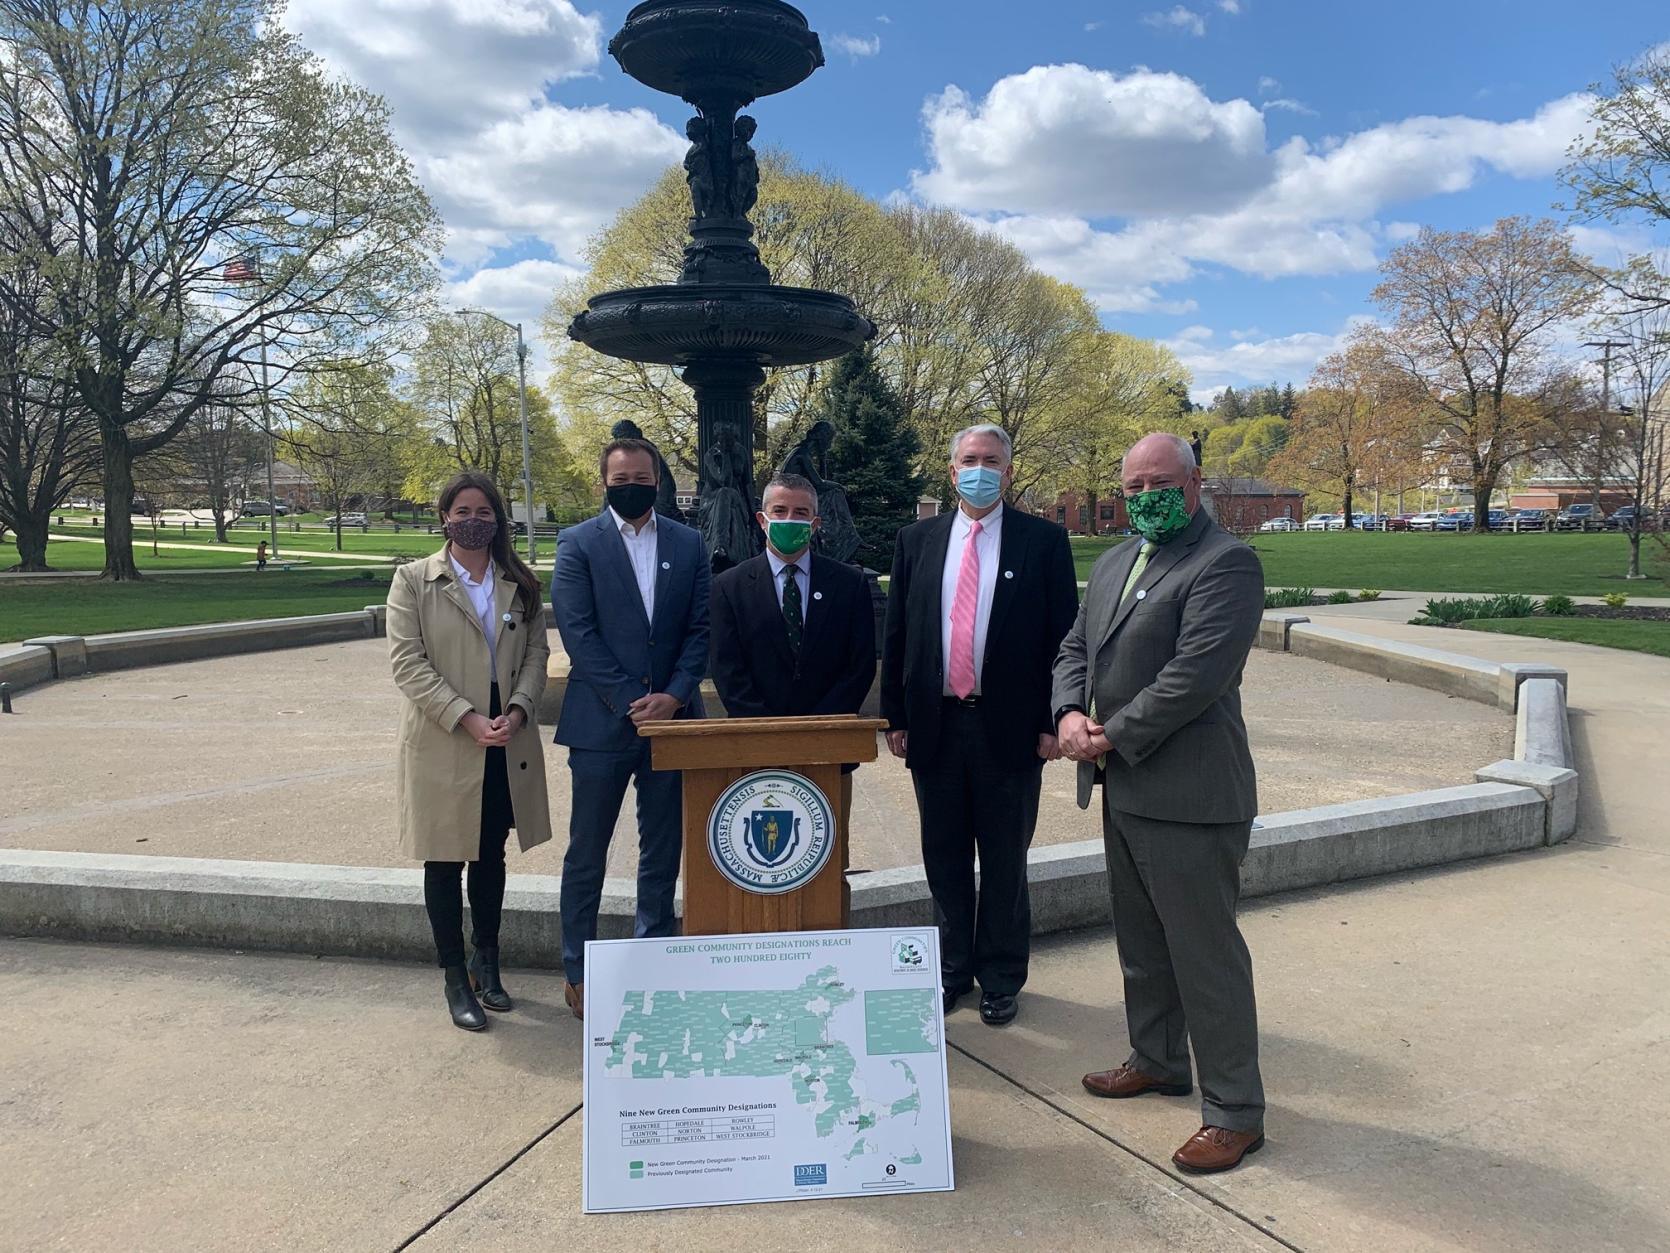 State Representative Meghan Kilcoyne, Department of Energy Resources Commissioner Patrick Woodcock, Board of Selectmen Chair Sean Kerrigan, Town Administrator Michael Ward, and Green Communities Director Brian Sullivan all joined at Central Park in Clinton.